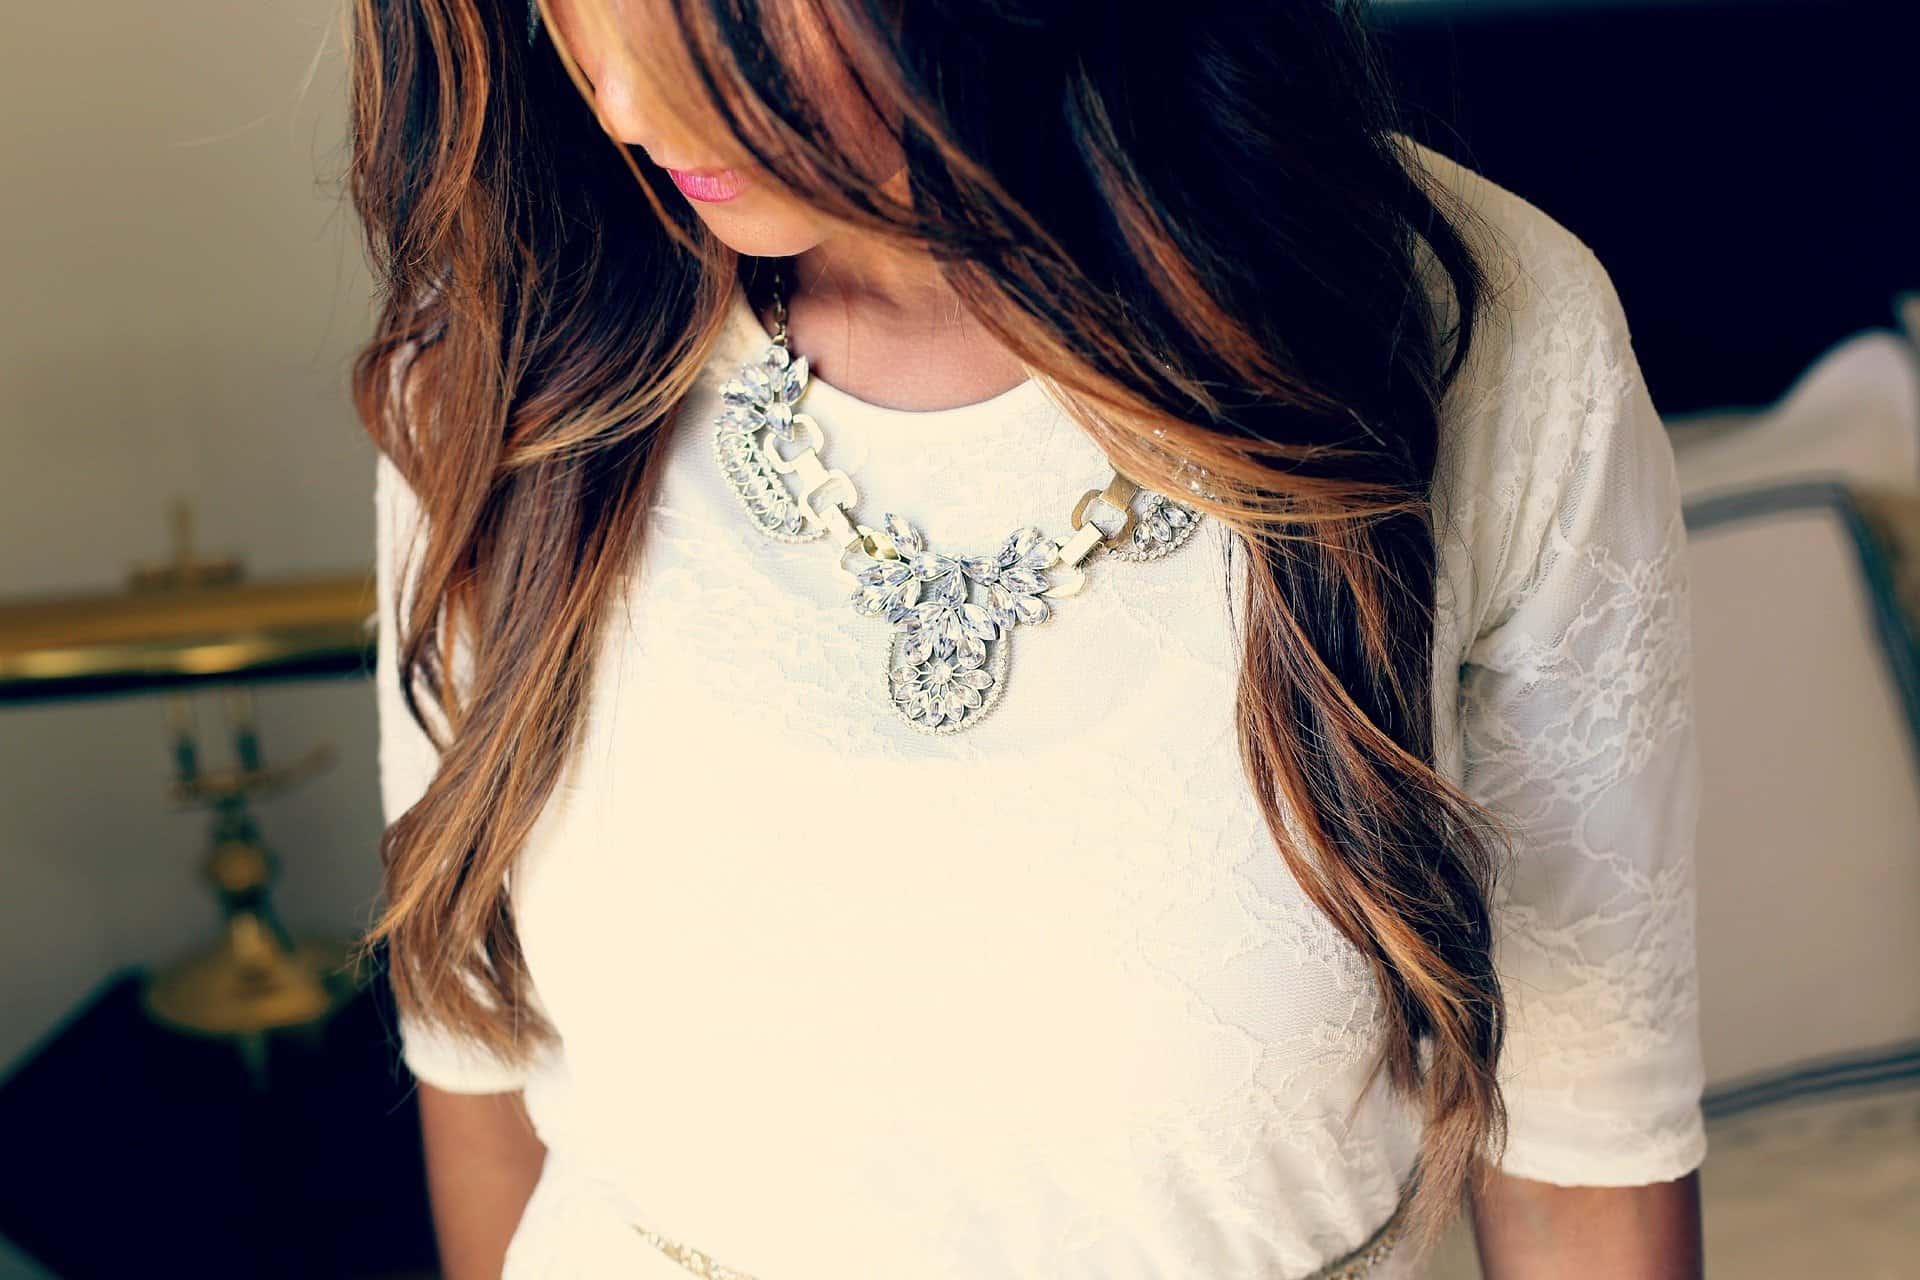 Can A Necklace Really Be Too Heavy? | READY HELP TO CHOOSE A NECKLACE OF OPTIMUM WEIGHT |